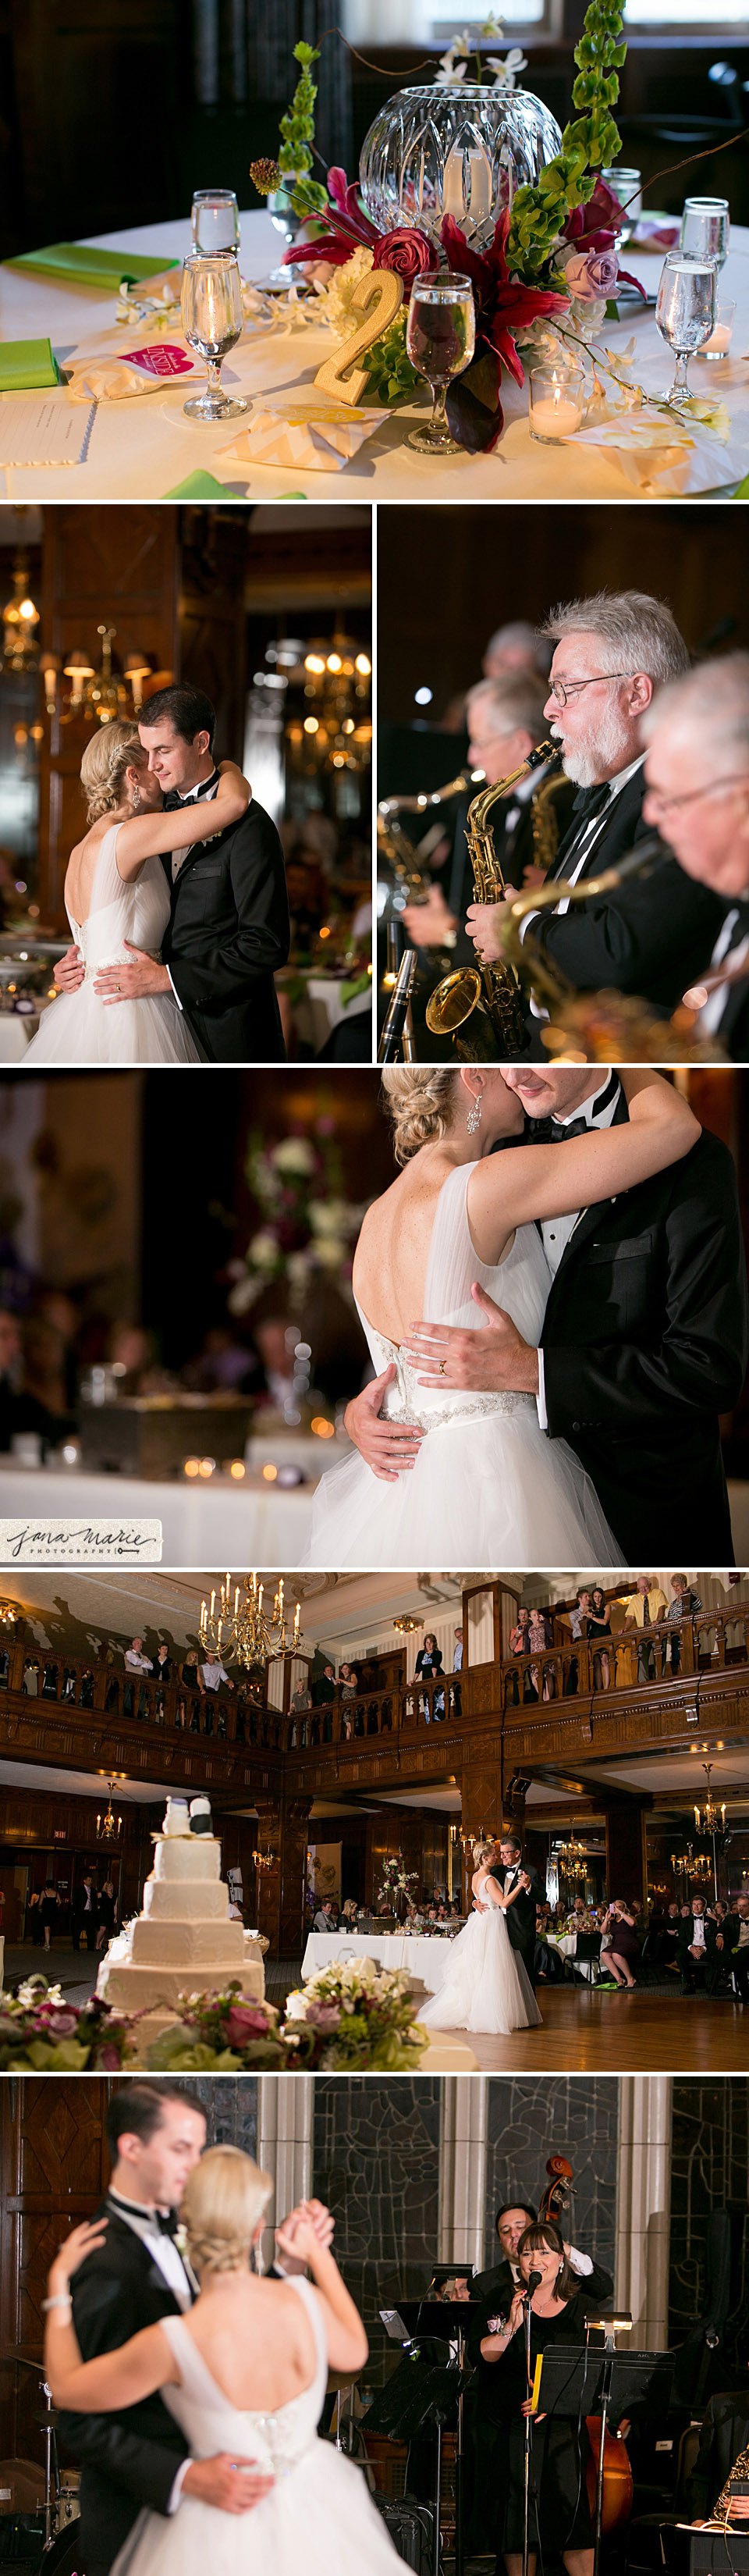 Allinder and Scott wedding, first dance, bride and groom, romantic photography, KC portraits, candids, father daughter dance